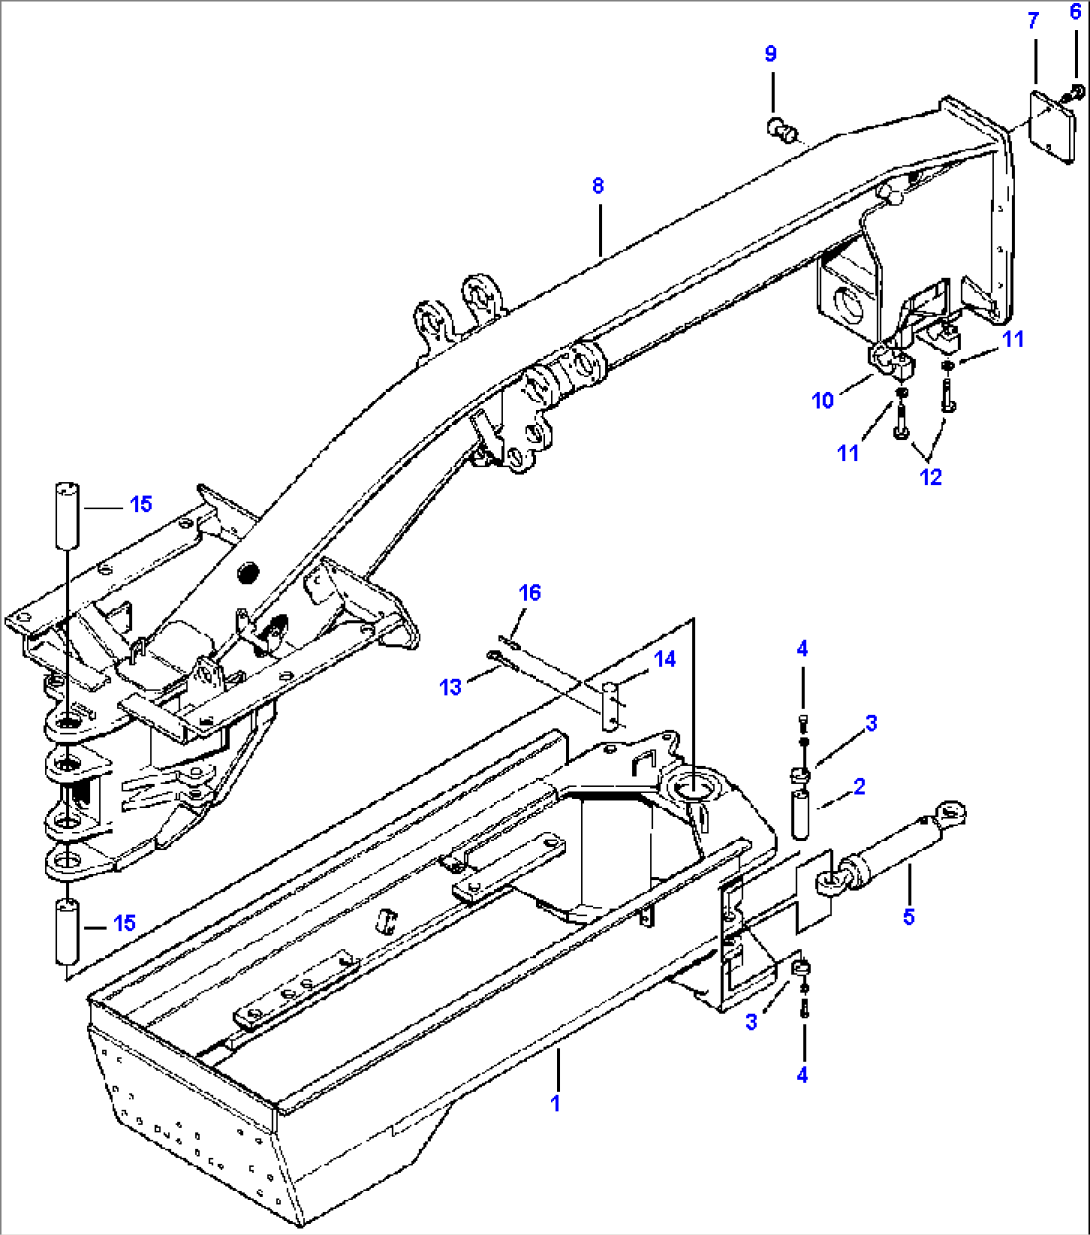 MAIN FRAME 530 2C - R.H. AND L.H. 90 DEGREES BLADE SUSPENSION - S/N 203163-203958